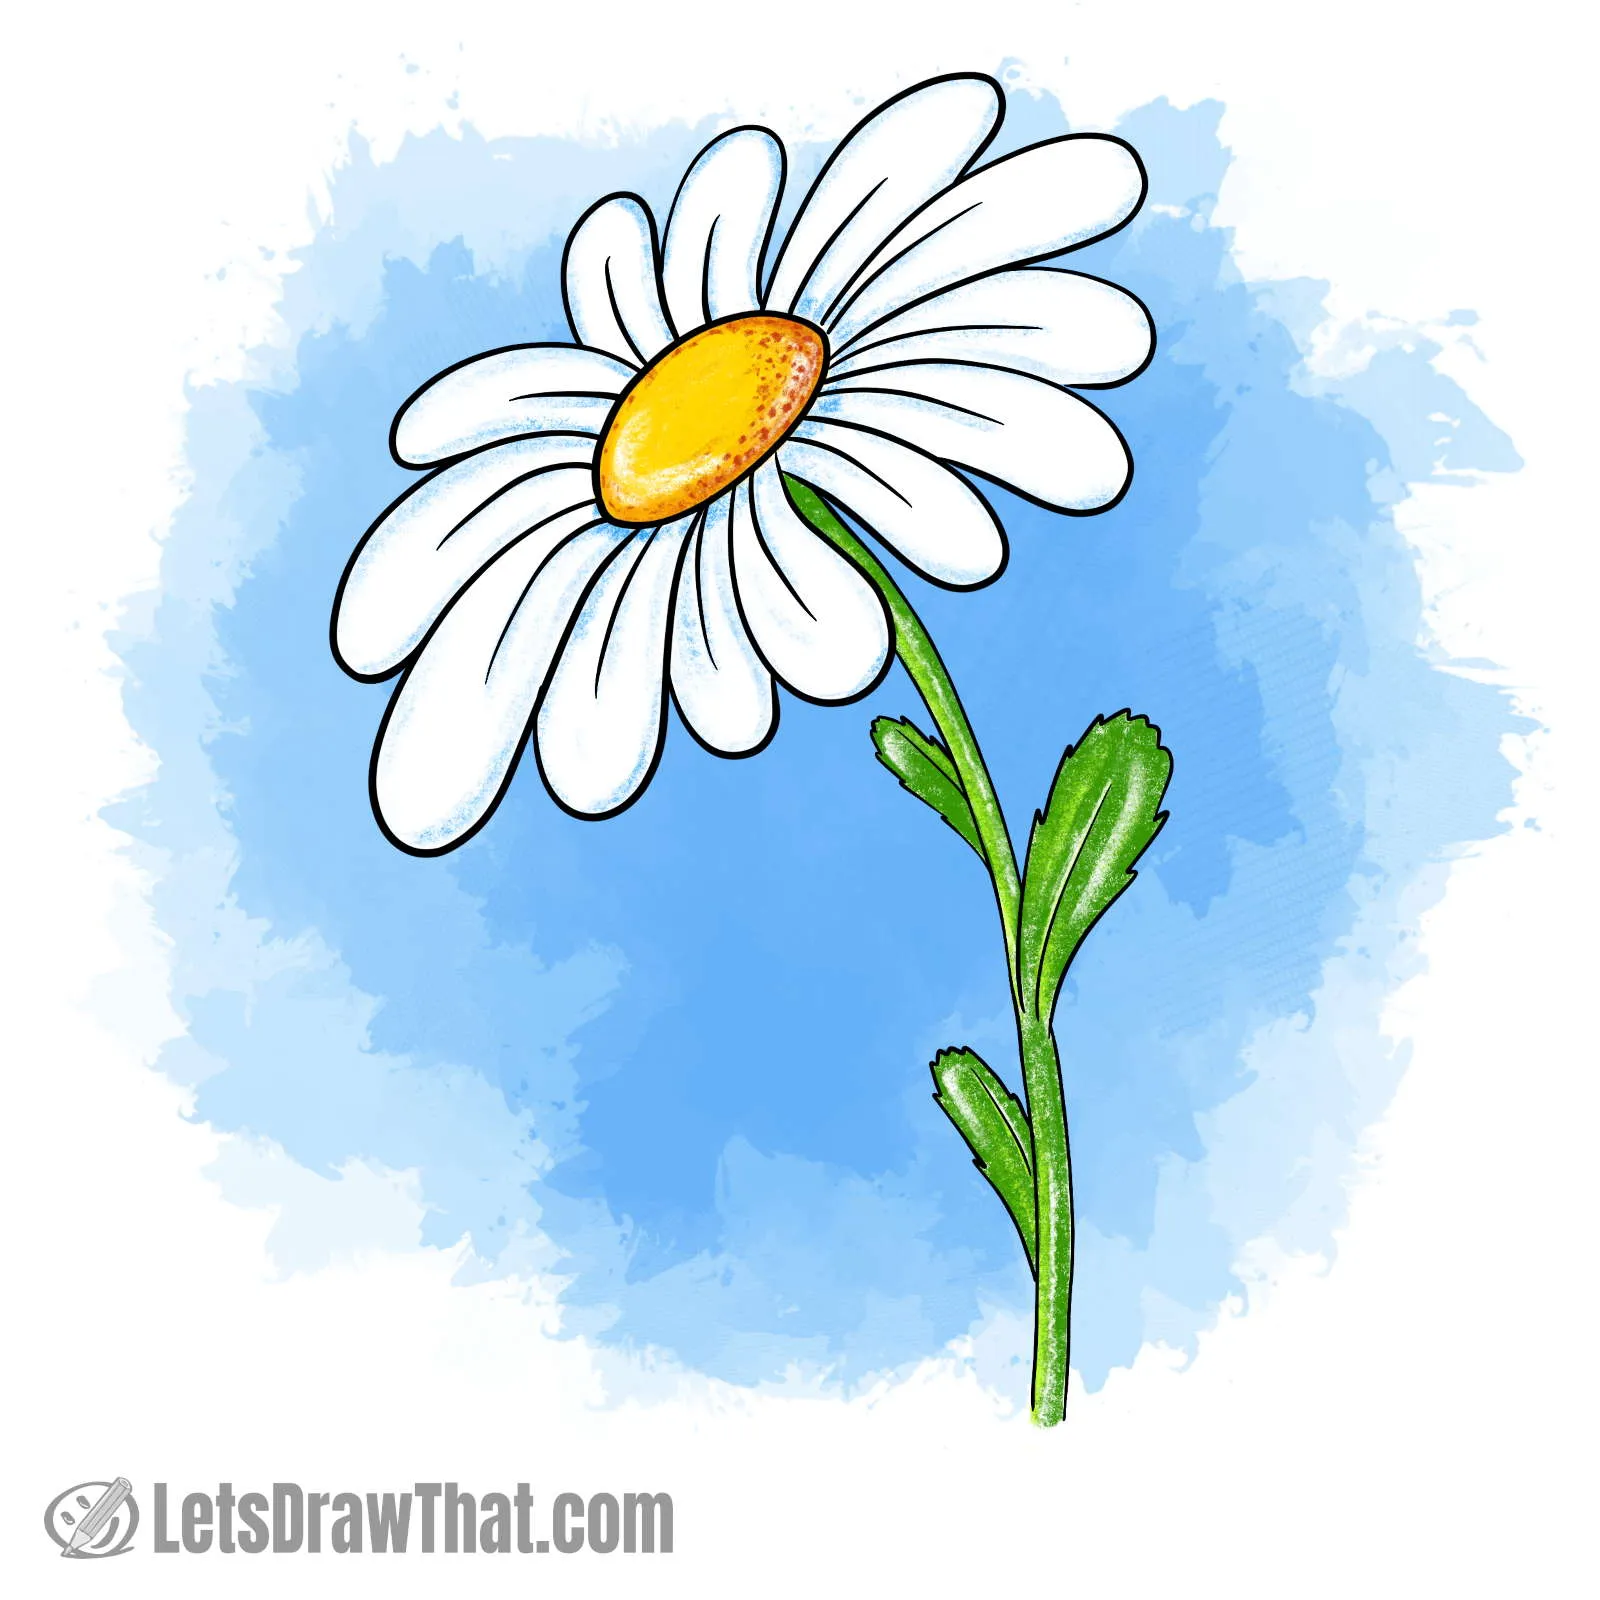 Daisy flower drawing colored-in